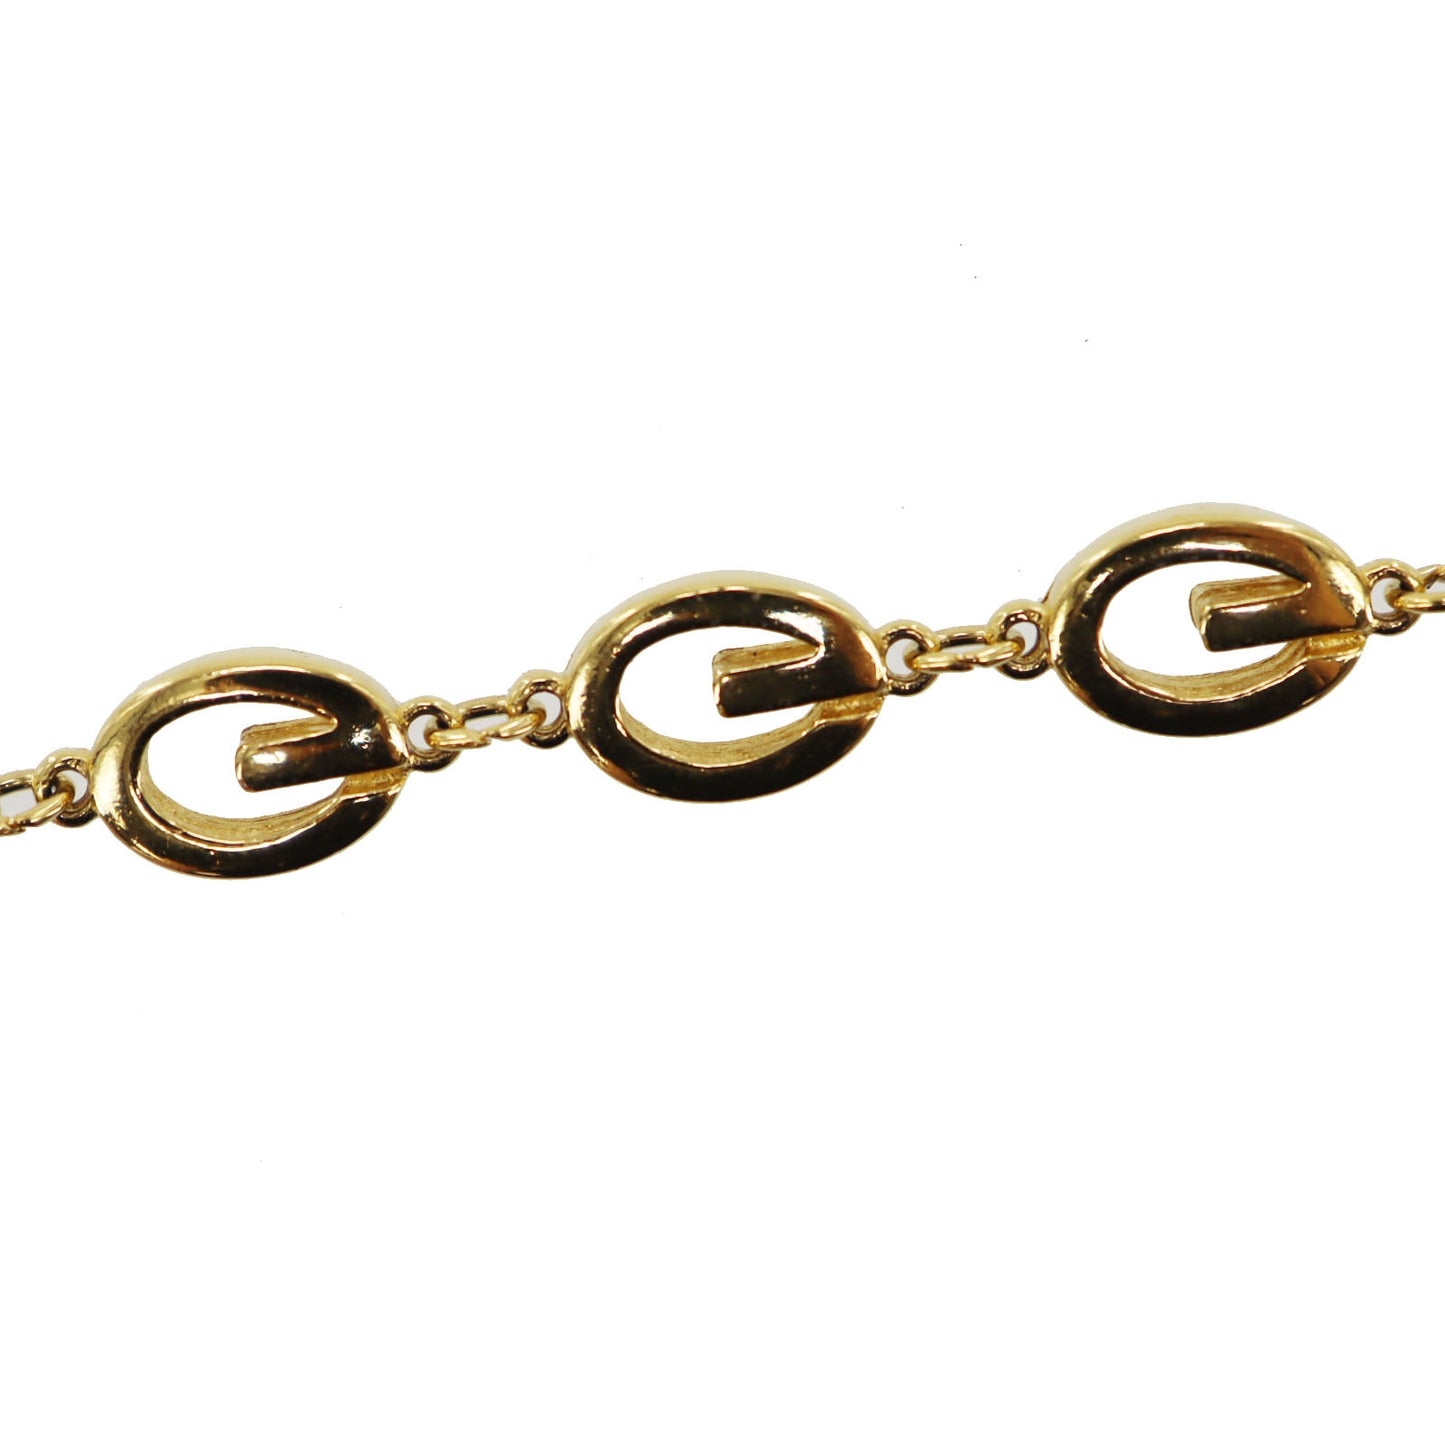 GIVENCHY G Logos Gold Bracelet 7.4in Gold-Plated Accessories #BO691